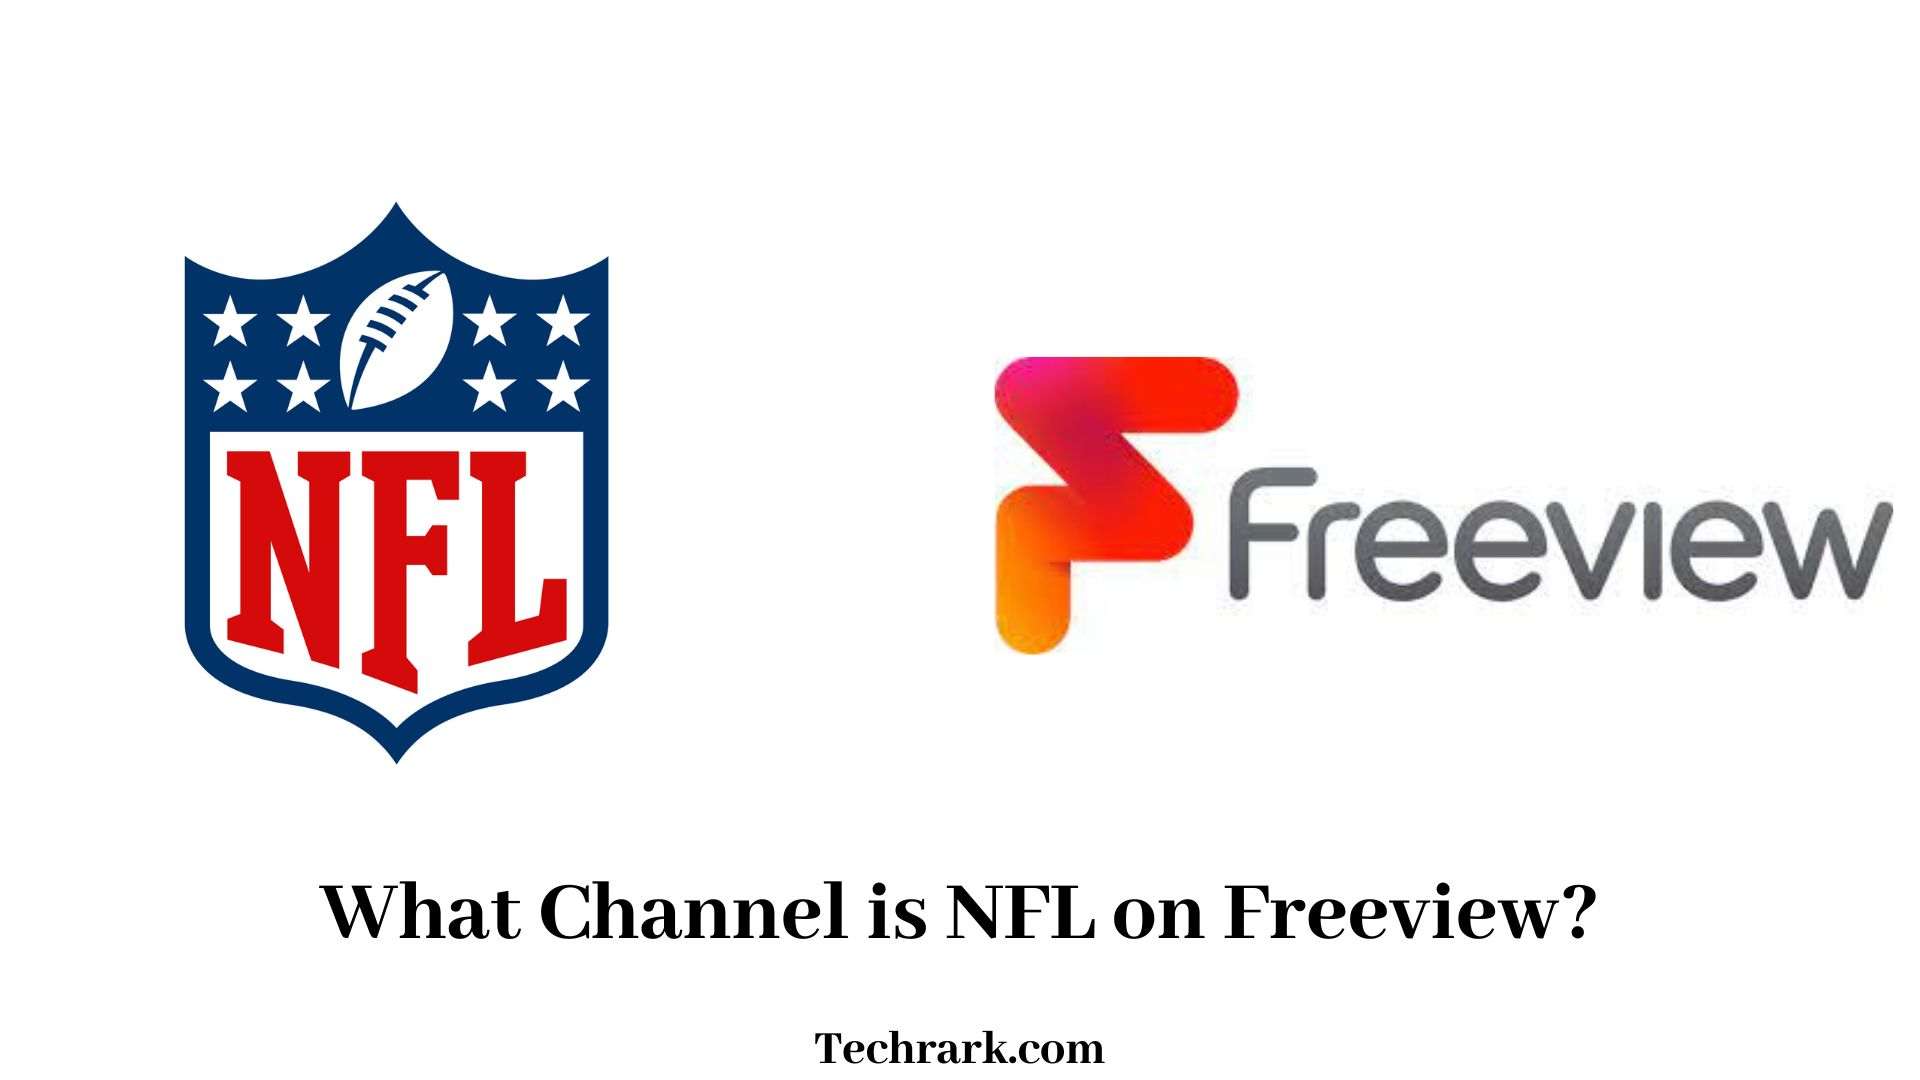 NFL on Freeview